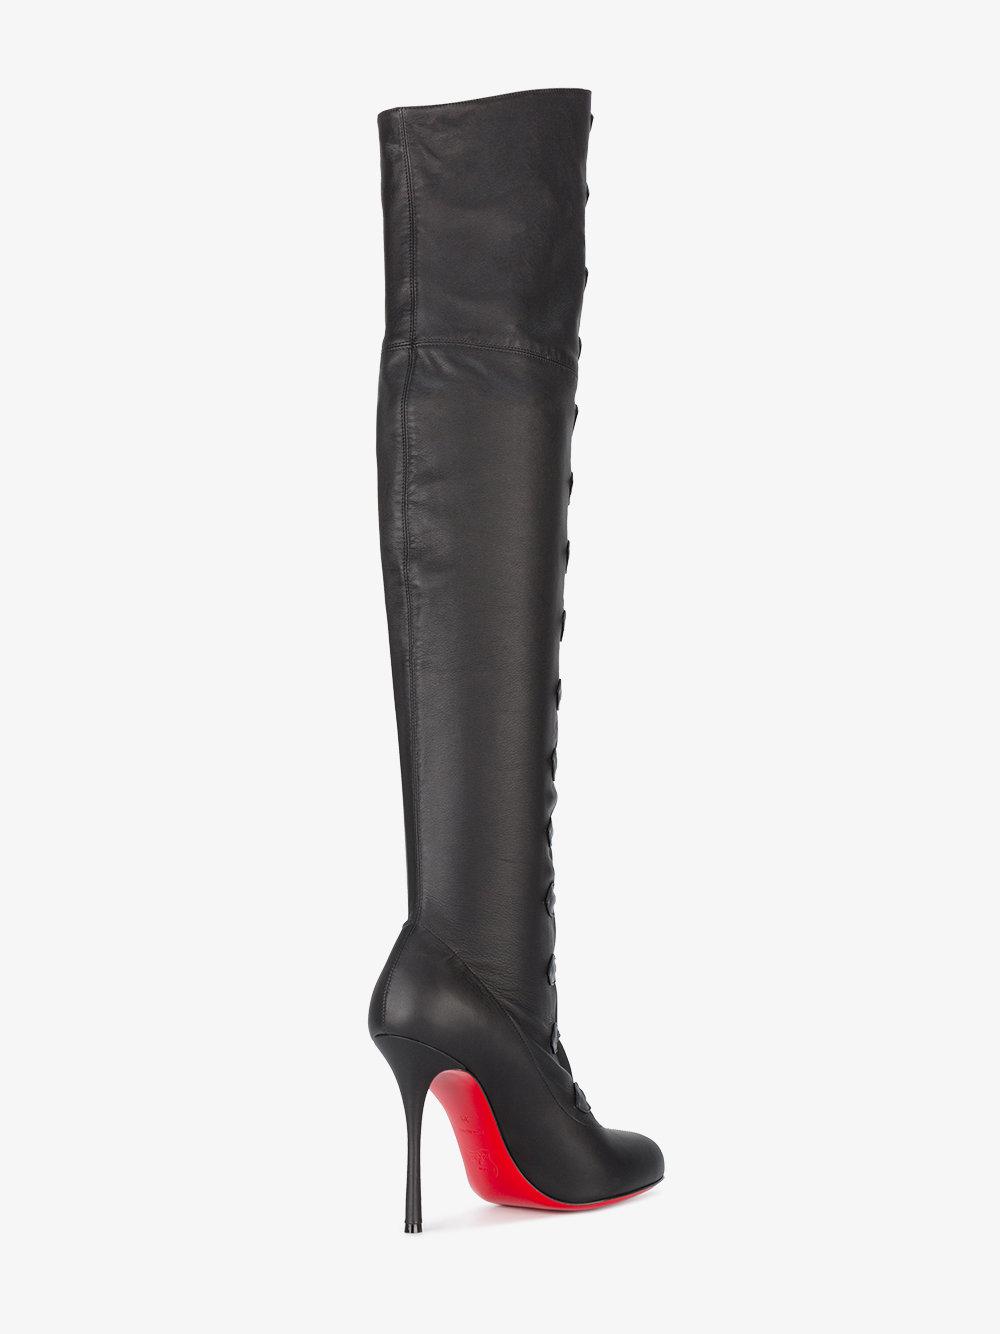 louboutin knee high boots